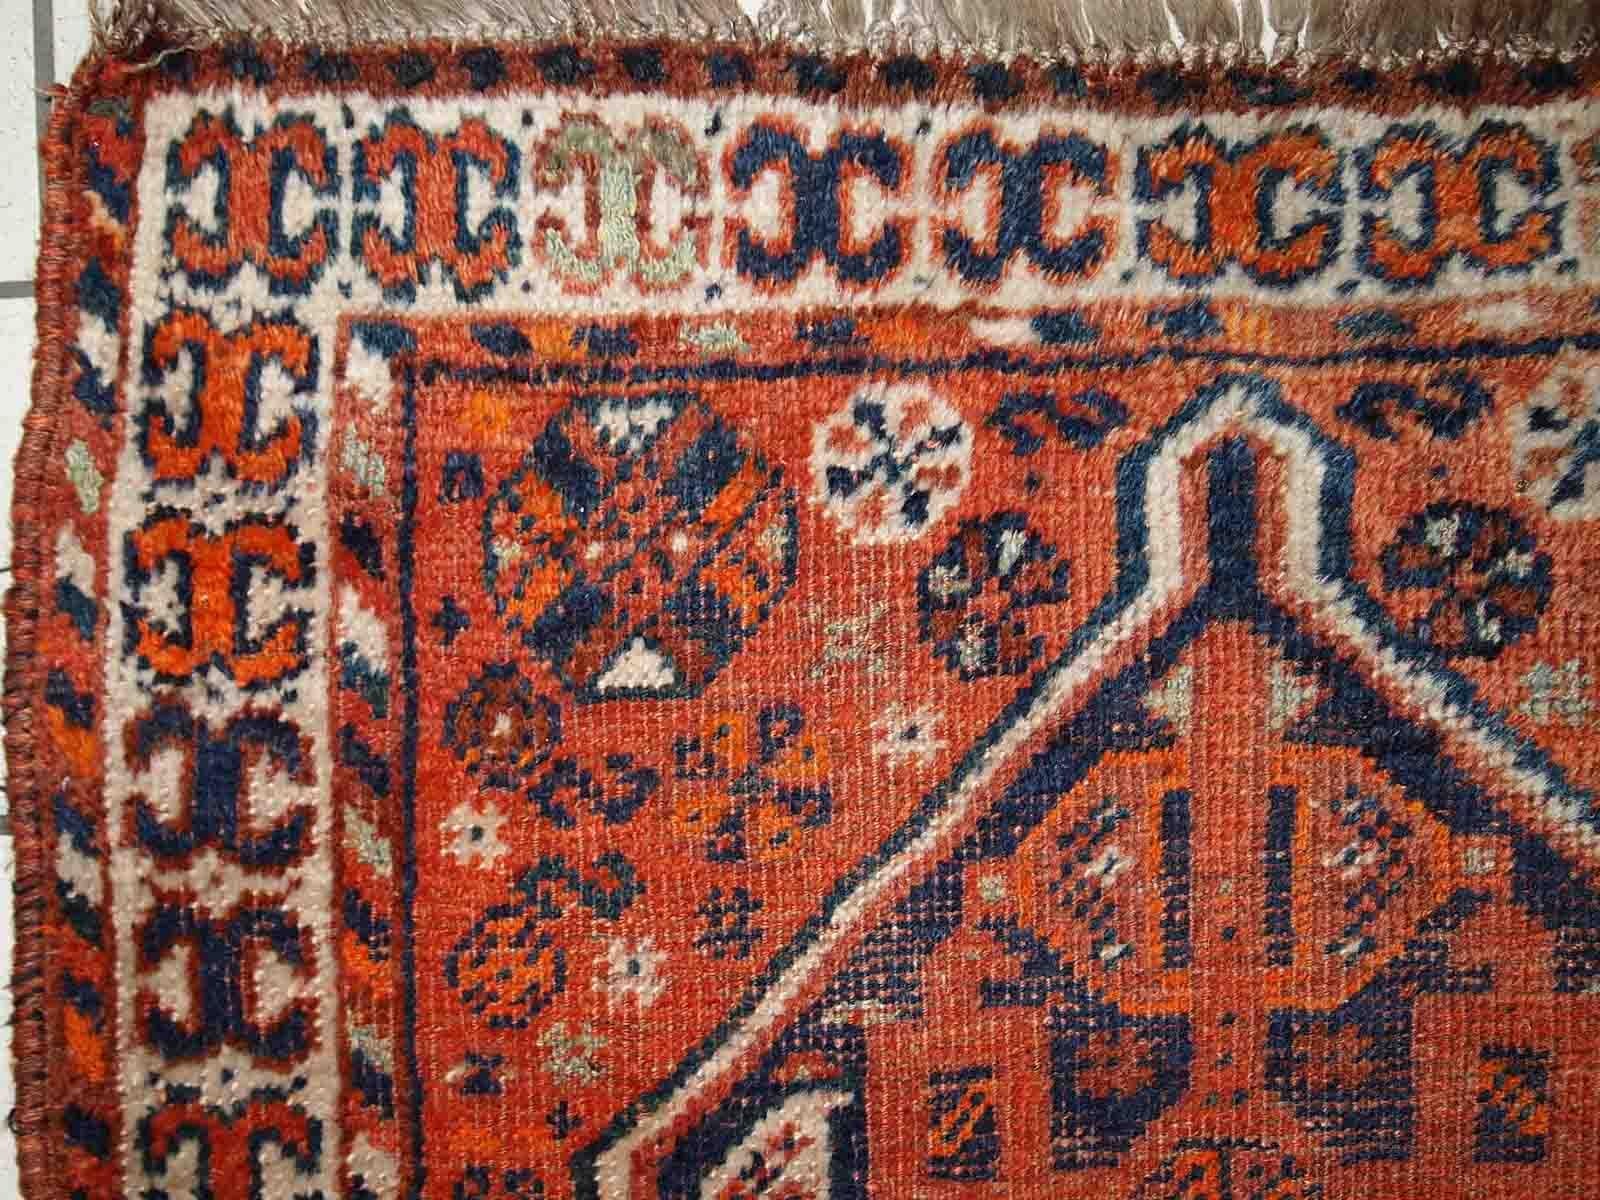 Handmade antique Middle Eastern rug in traditional design. The rug is from the beginning of 20th century in distressed condition. 

-condition: distressed,

-circa: 1900s,

-size: 2.8' x 3.7' (87cm x 114cm),

-material: wool,

-country of origin: